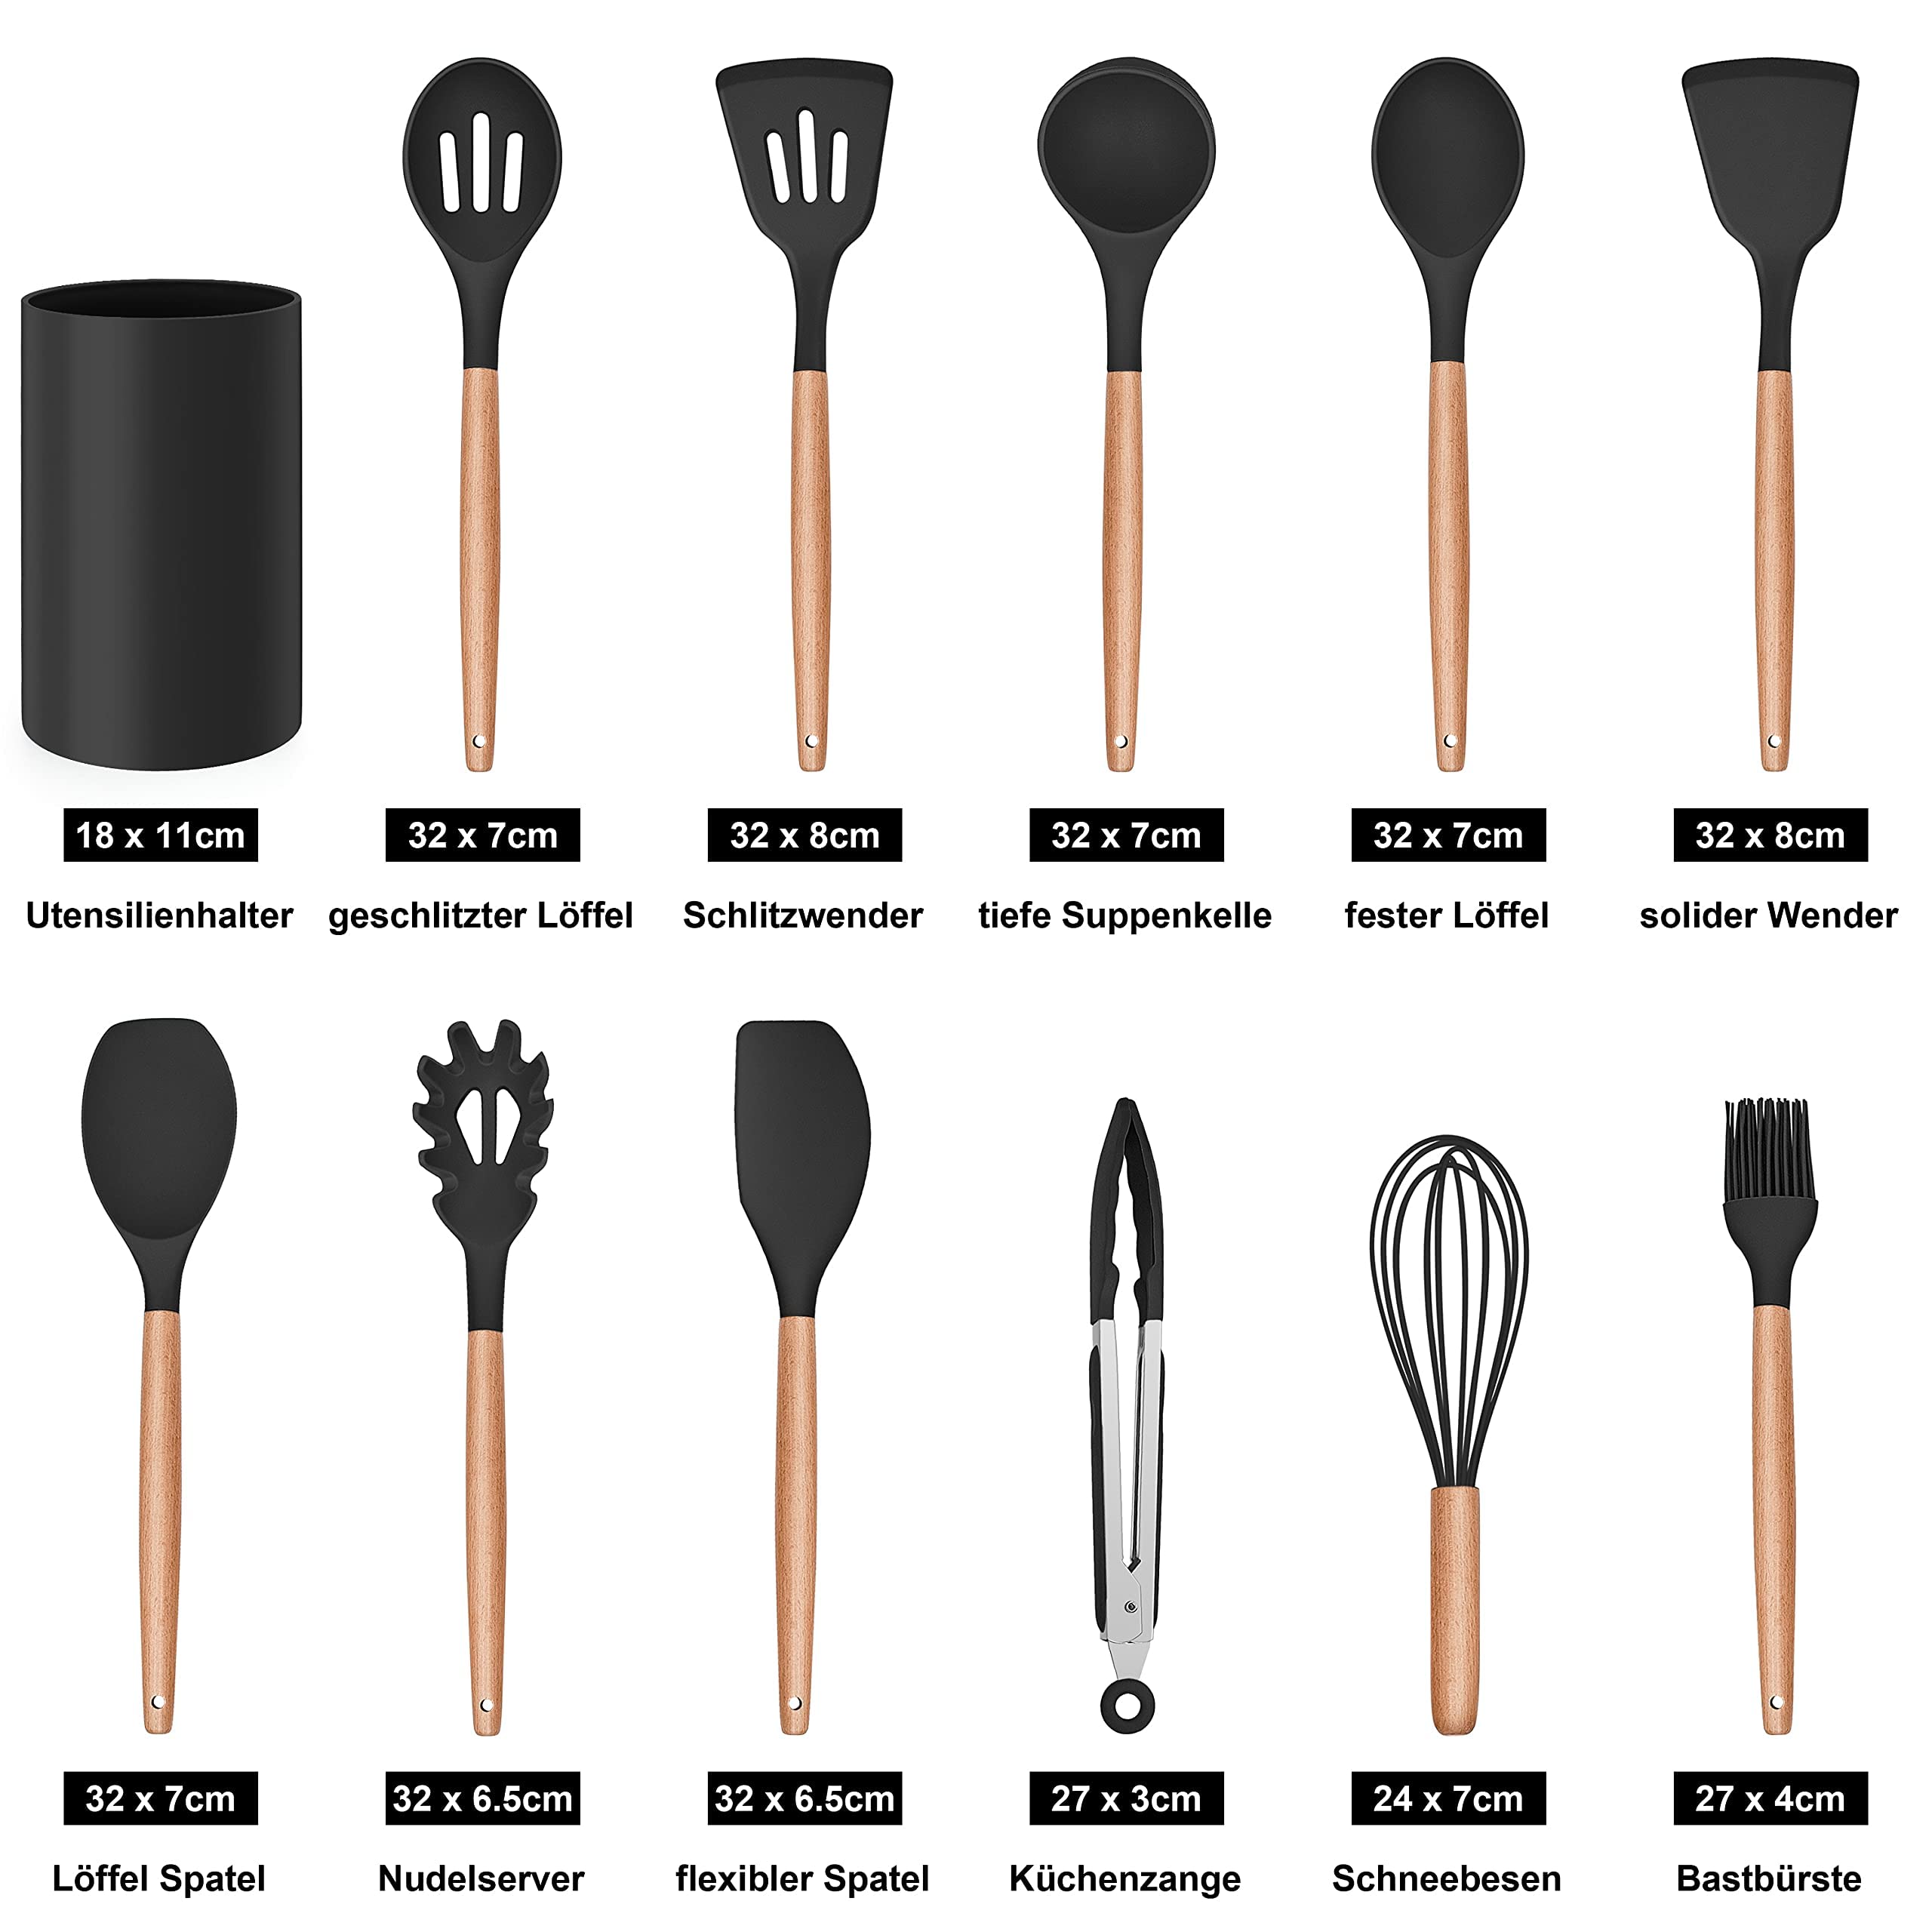 VIO Kitchen Utensil Set,12 Piece Cooking Utensils Set, Heat Resistant Cookware Set with Wooden Handle, Non-Stick Kitchen Utensils, Kitchen Set with Holder, Spatula Set with Spatula Tongs (BLACK)